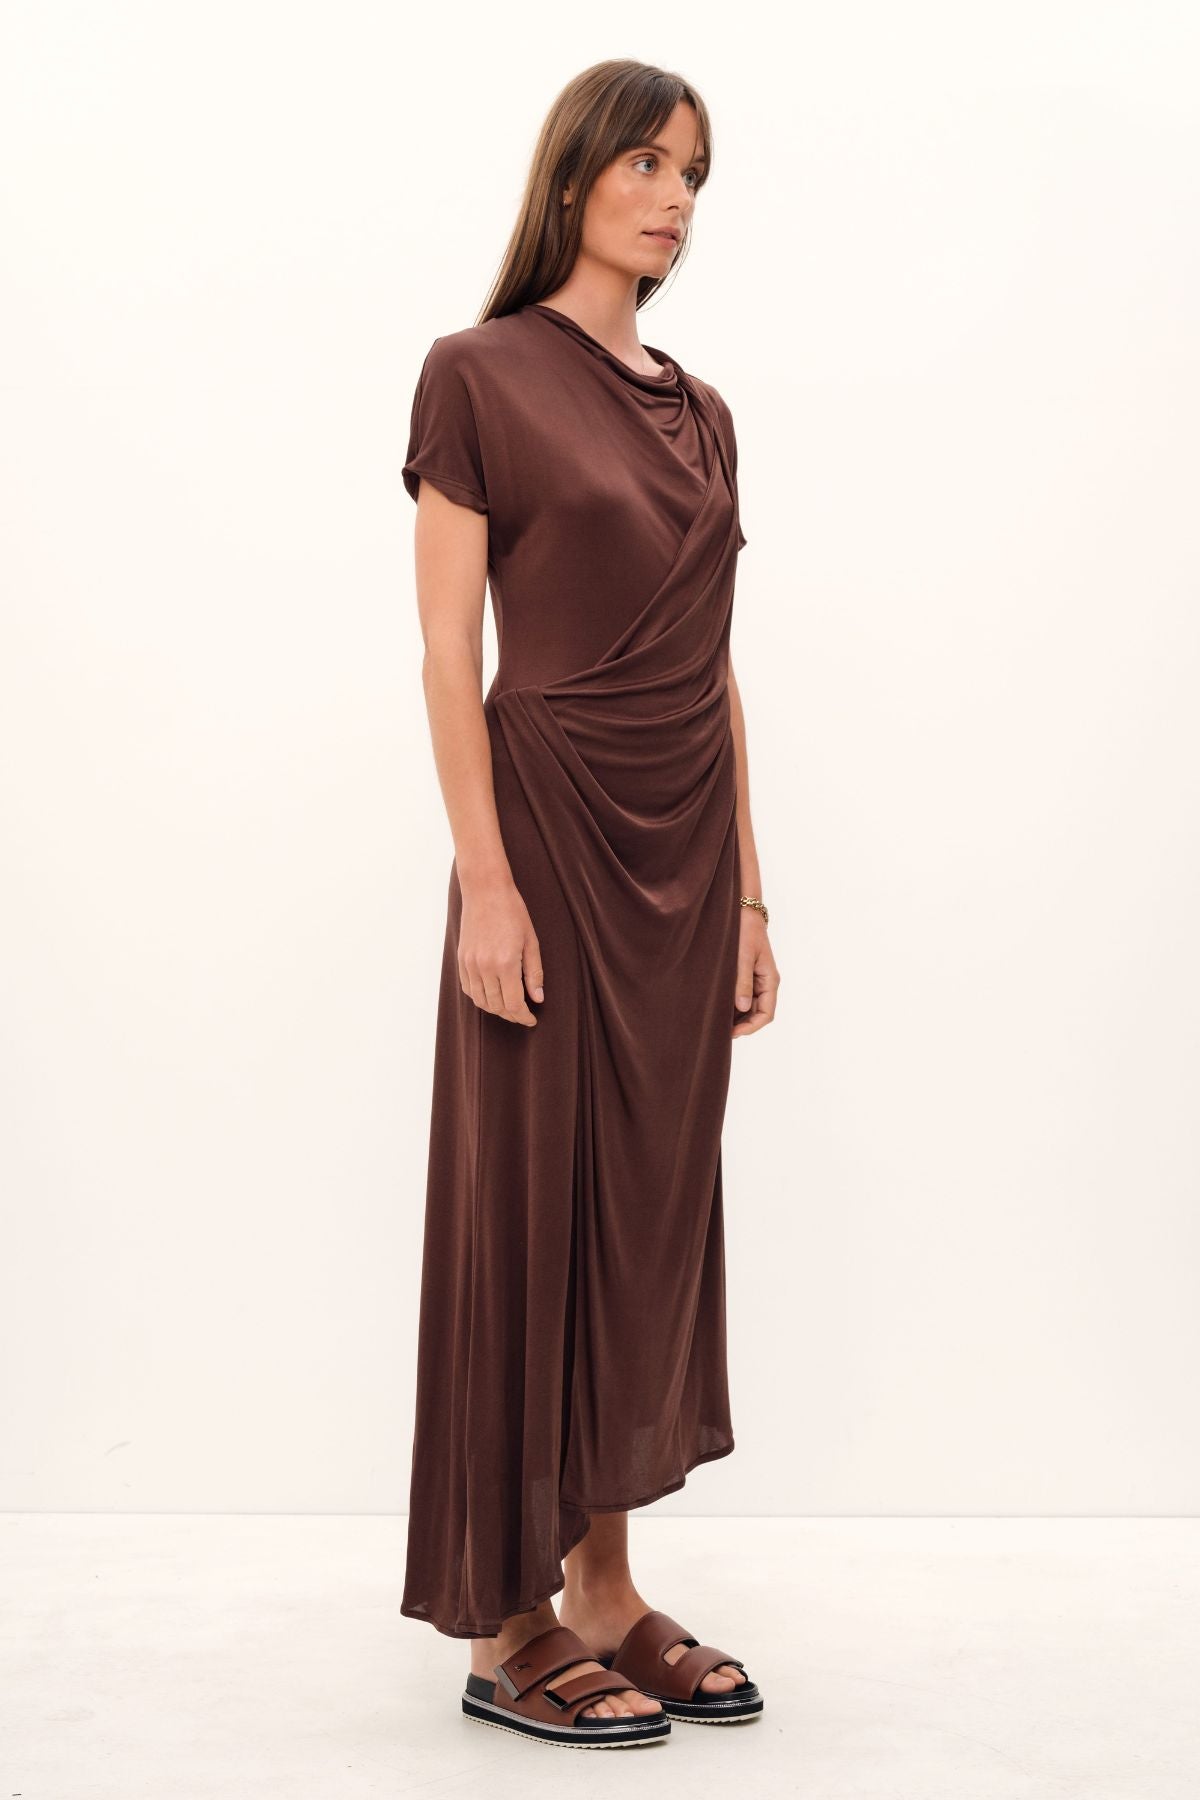 The Aphrodite Draped Dress, exquisitely crafted in silk viscose jersey of a coco hue, boasts a relaxed silhouette with an asymmetric hem and sleeves, a cinched waistline that gracefully drapes, a delicate stretch fabric, and a midi length with a sublime twist detail across the neck and shoulder.